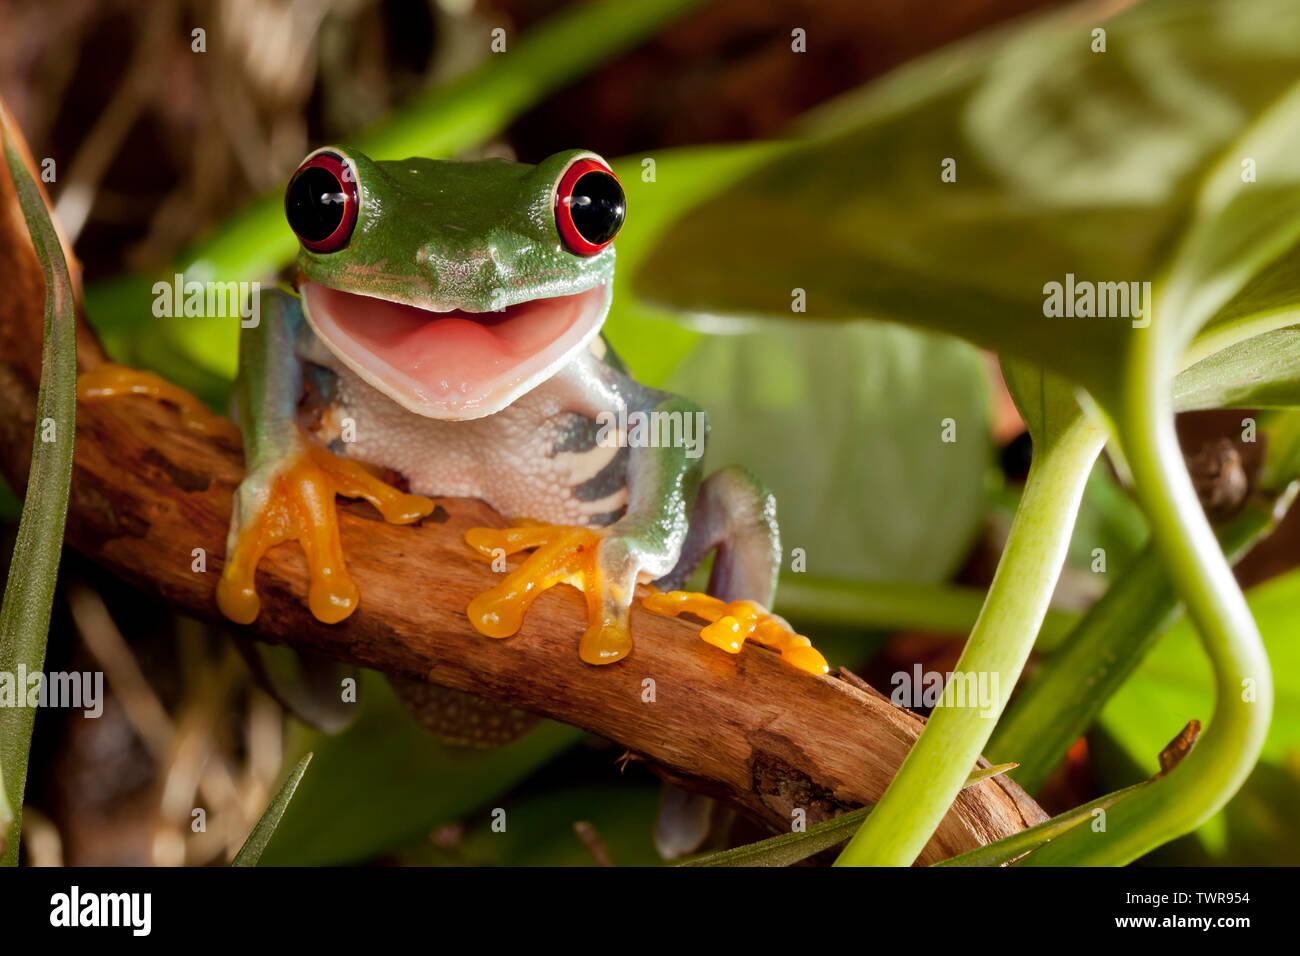 Red-eyed tree frog sourire Banque D'Images